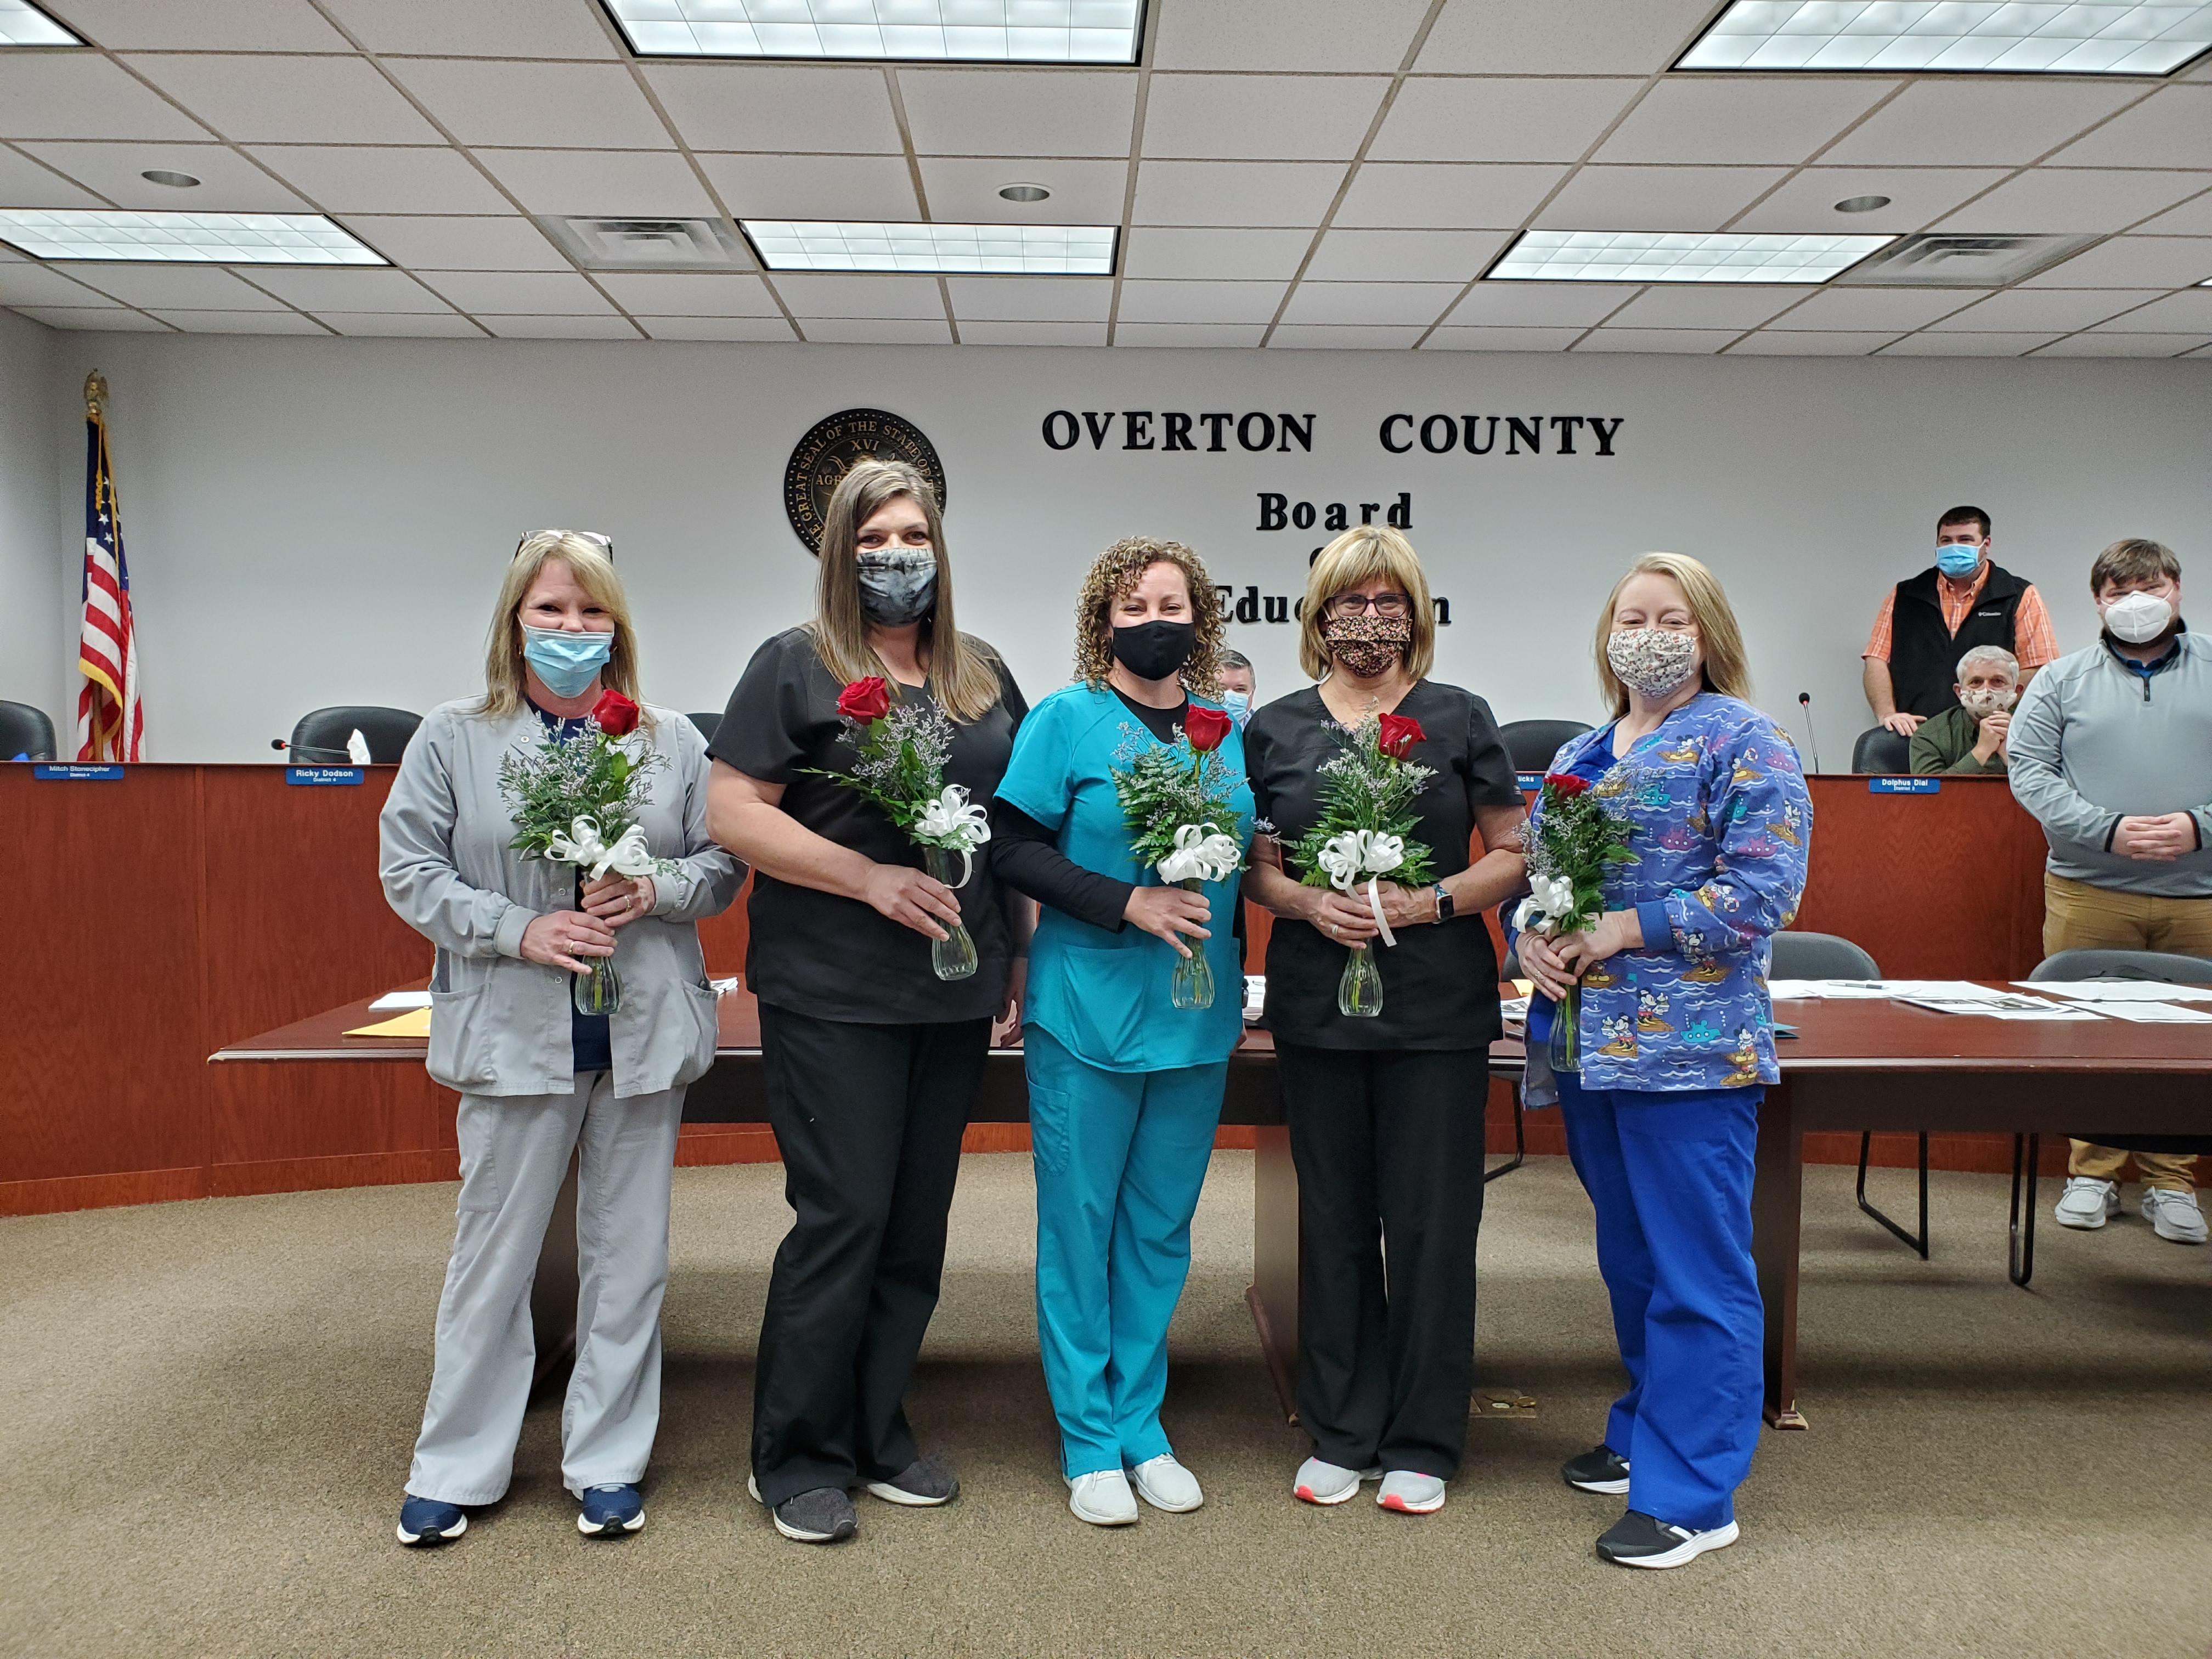 Overton County School Nurses from left to right:  Rhonda Smith, Rebecca Gunnels, Marcie Matthews, Cindy Sells, and Tammy Nimmo